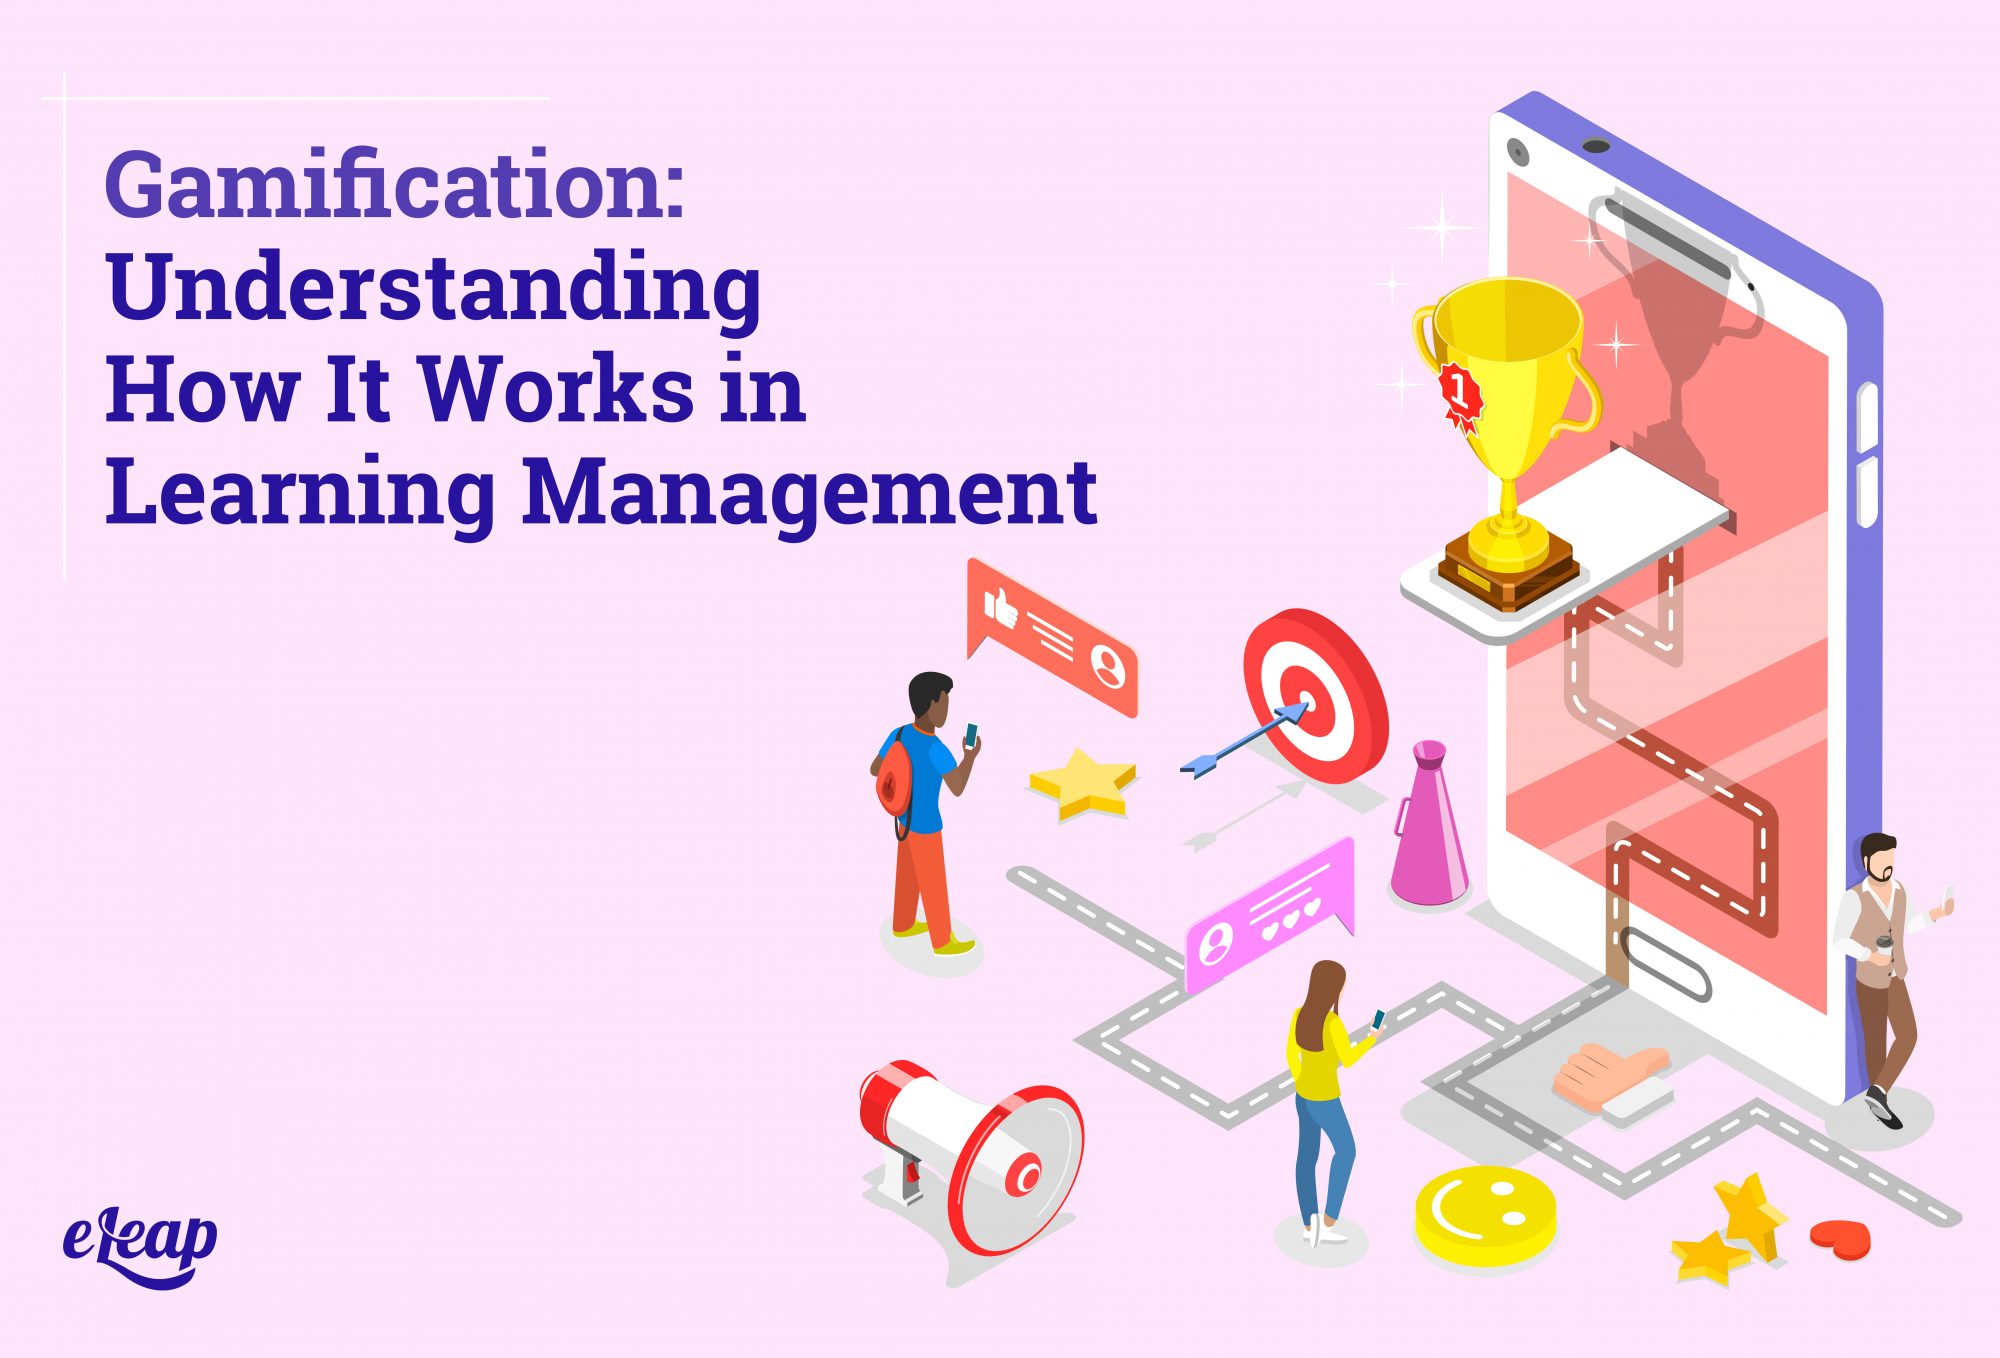 Gamification: Understanding How It Works in Learning Management